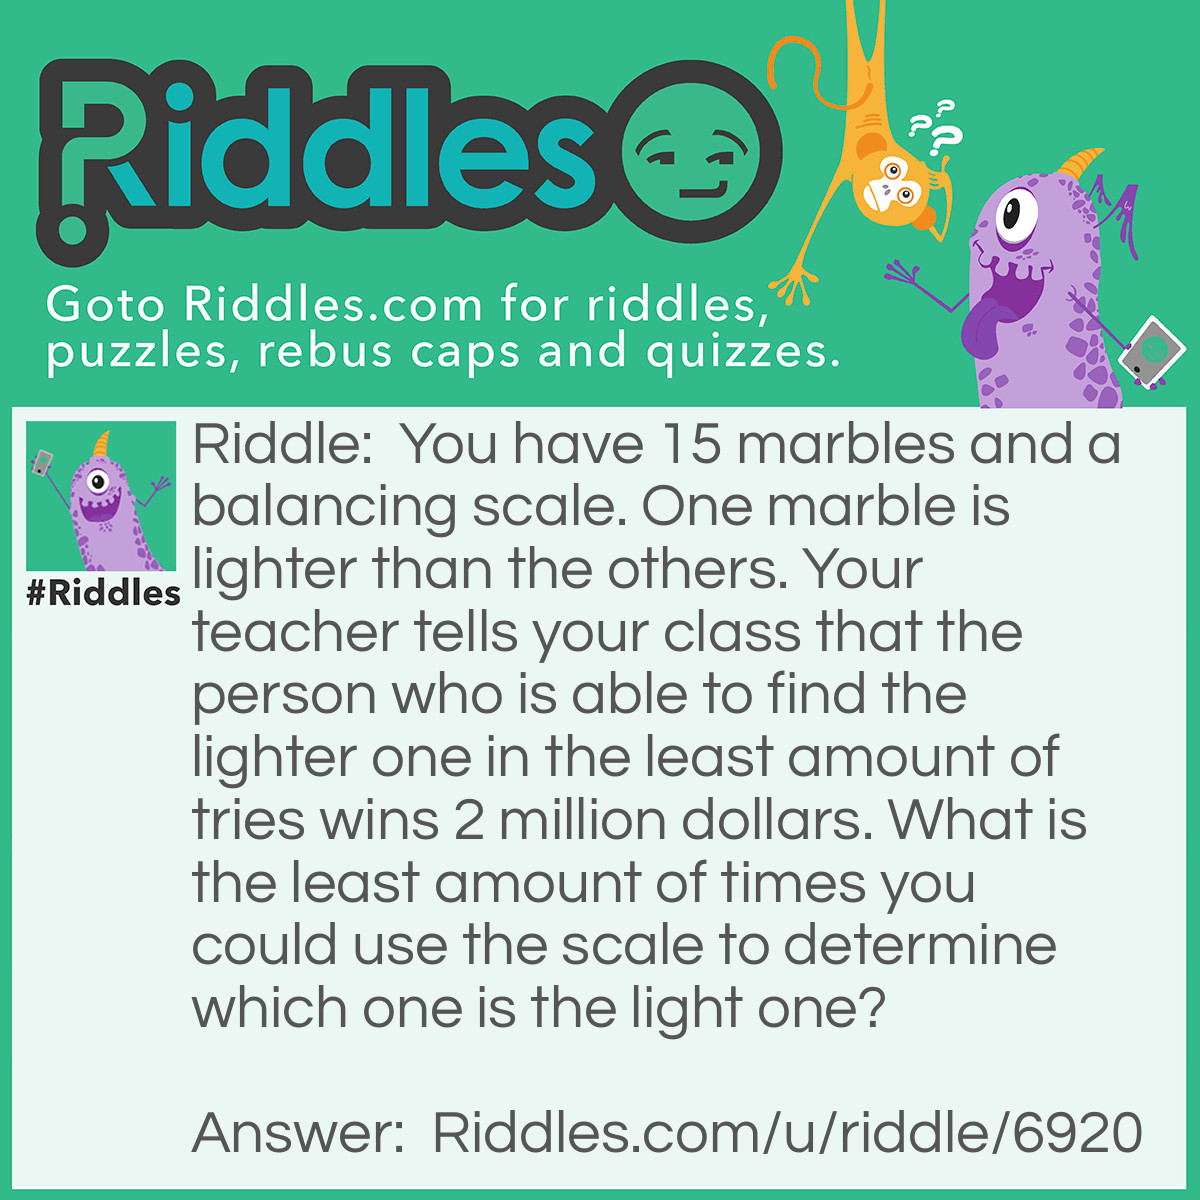 Riddle: You have 15 marbles and a balancing scale. One marble is lighter than the others. Your teacher tells your class that the person who is able to find the lighter one in the least amount of tries wins 2 million dollars. What is the least amount of times you could use the scale to determine which one is the light one? Answer: Only three times. First, you put seven marbles on each side of the scale. If they are equal then the marble left out is the lighter one. If not, then take the lighter side and put three of those marbles on each side of the scale. If the scale is level that means the marble left out is the lighter one. If not take the lighter side and put one marble on each side, if it is equal then the marble left out is the lighter one. If not then the side that is lighter is the marble you're looking for.